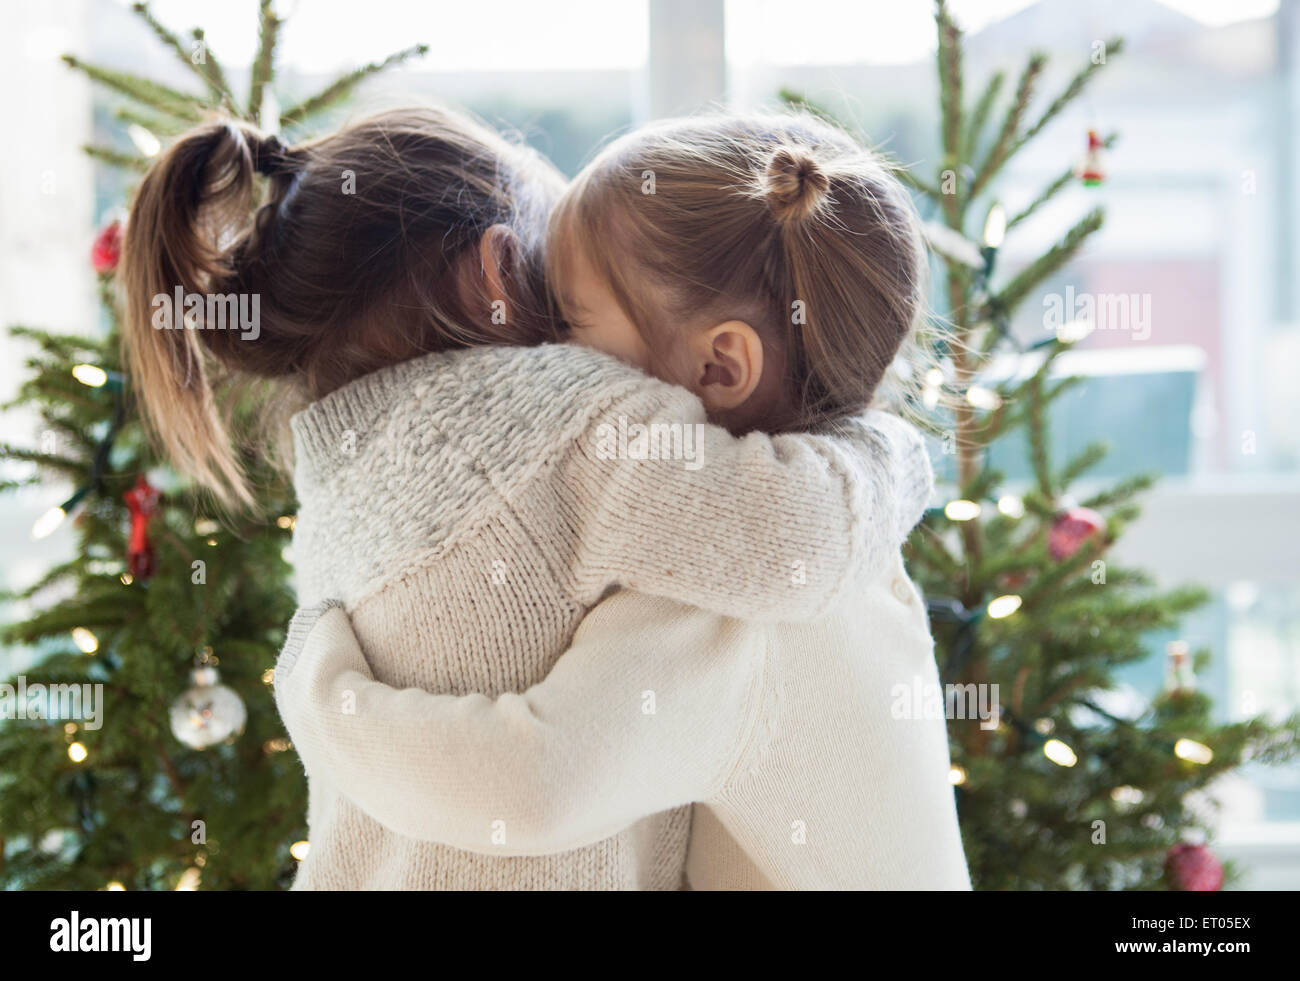 Girls hugging in front of Christmas trees Stock Photo